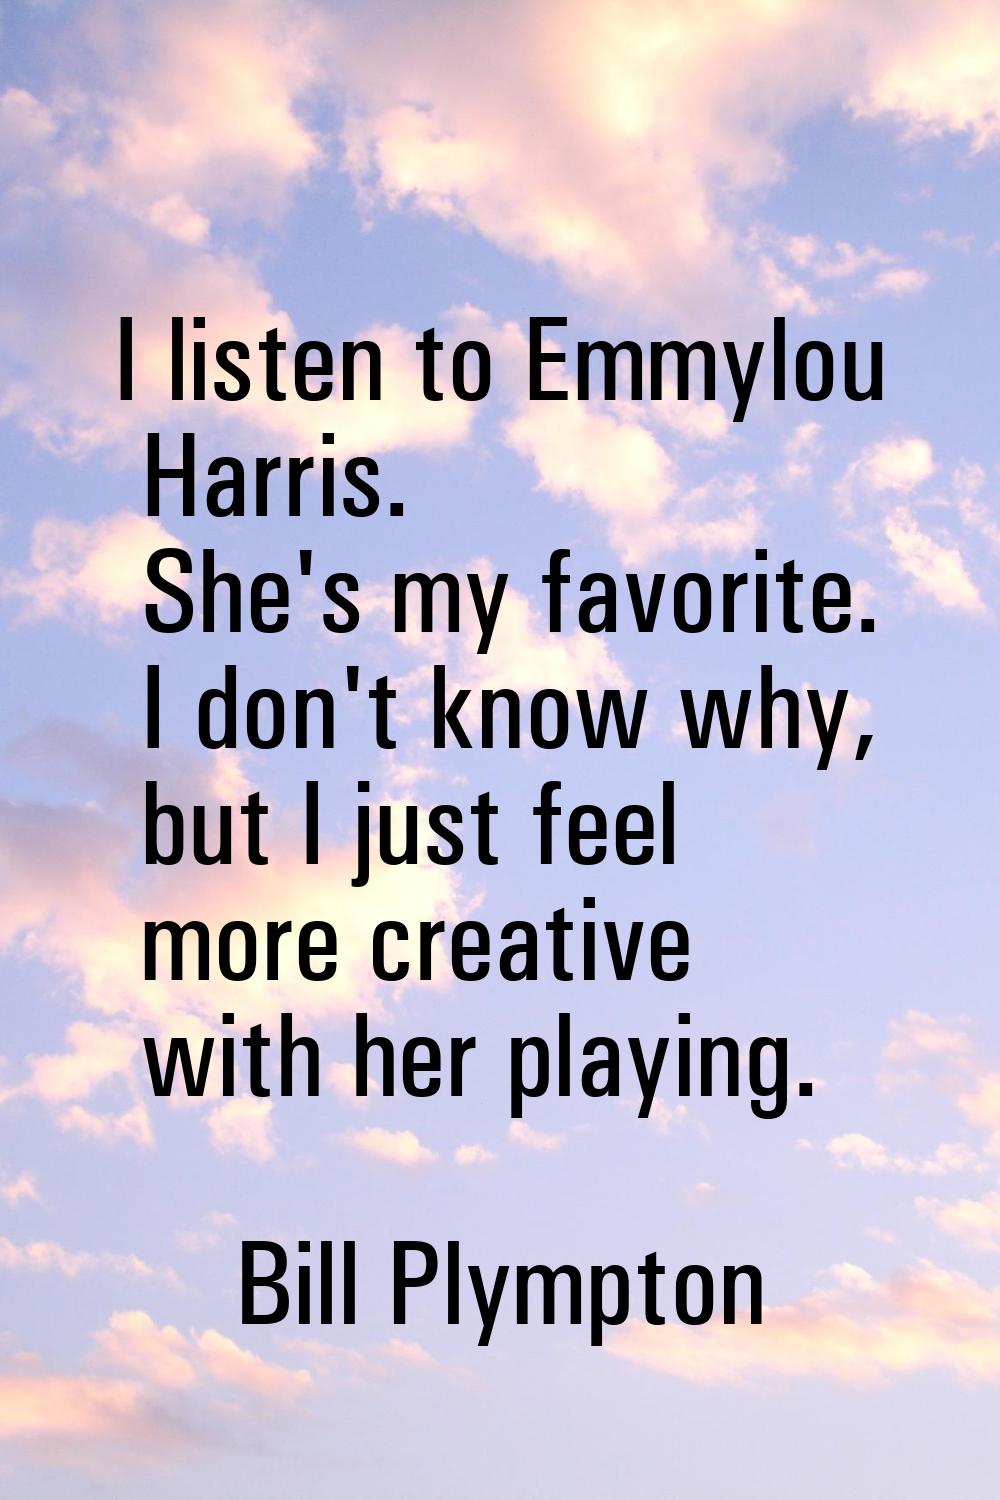 I listen to Emmylou Harris. She's my favorite. I don't know why, but I just feel more creative with